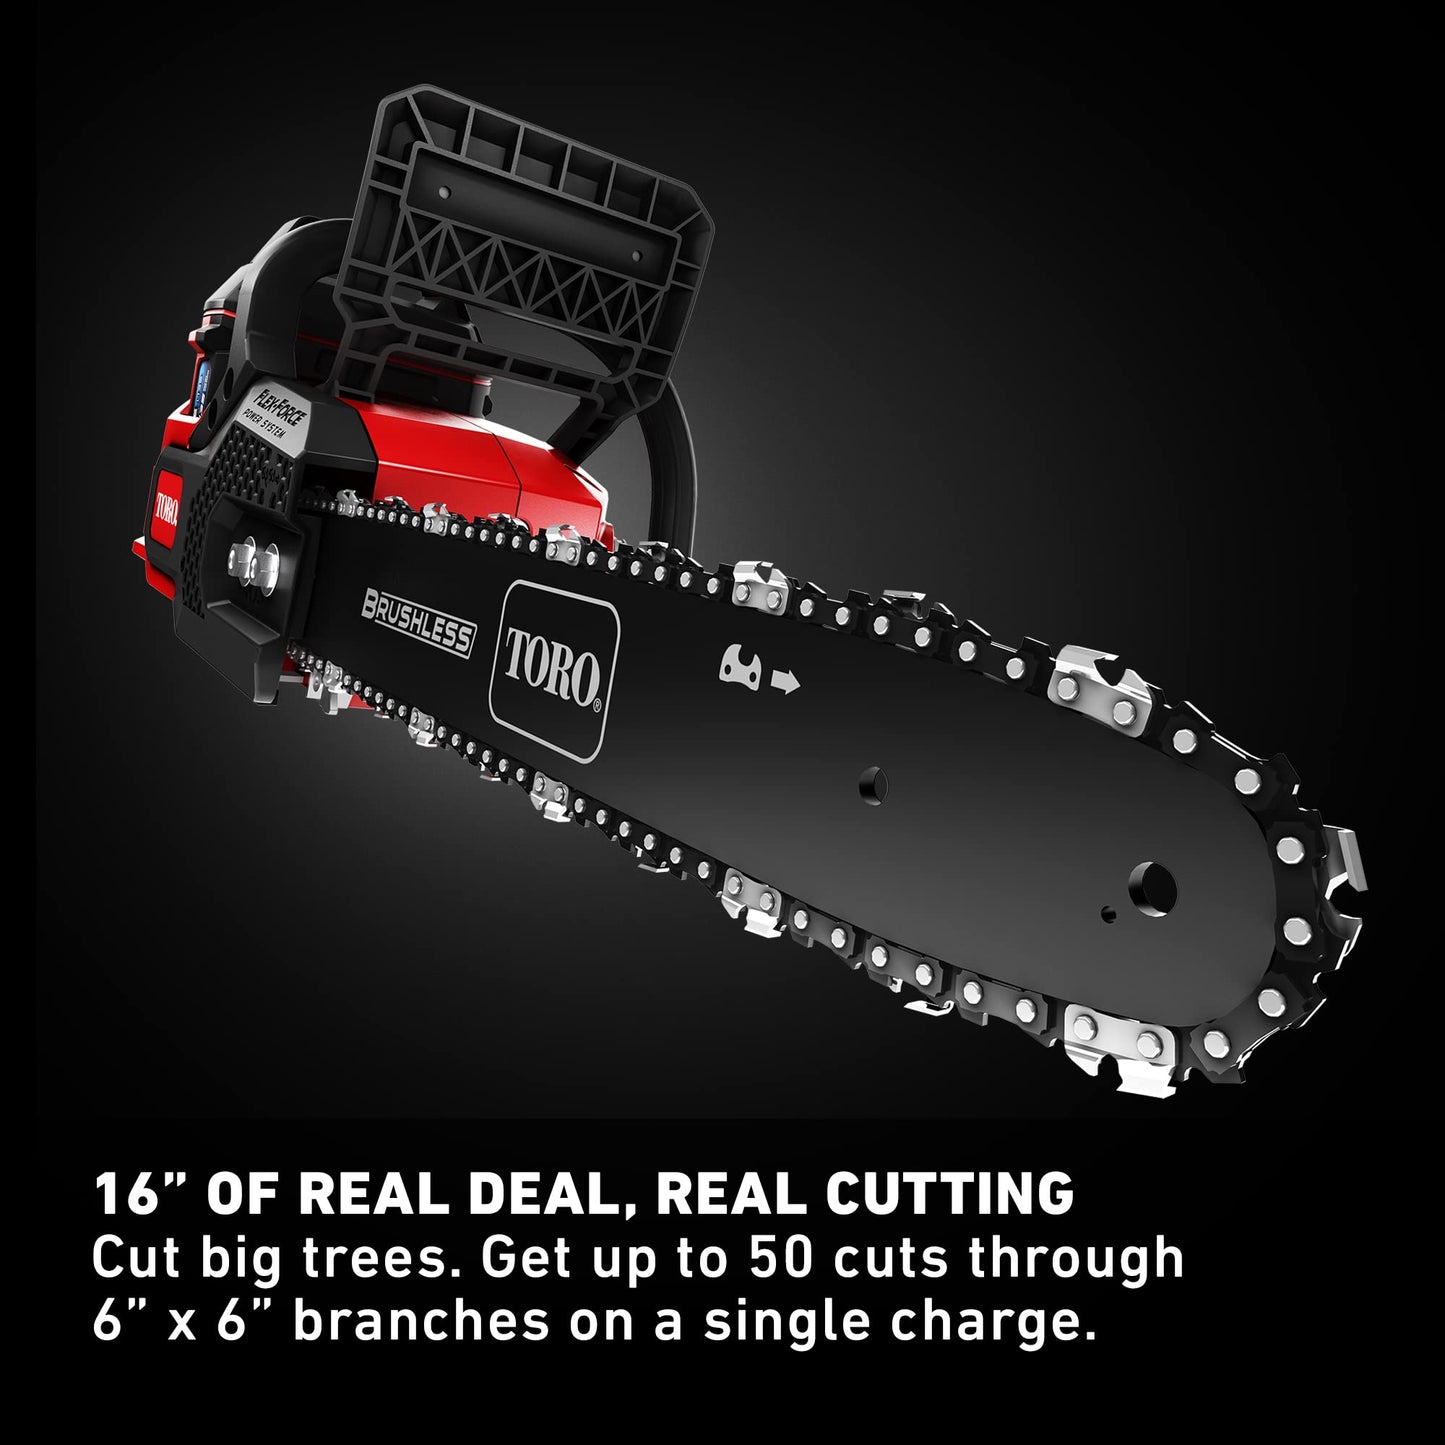 Flex-Force 60 Volt Max 16 Inch Lithium Ion Electric Chainsaw with 3 Phase Brushless RunSmart Motor, 2.5 Amp Hours Battery, and Charger, Red